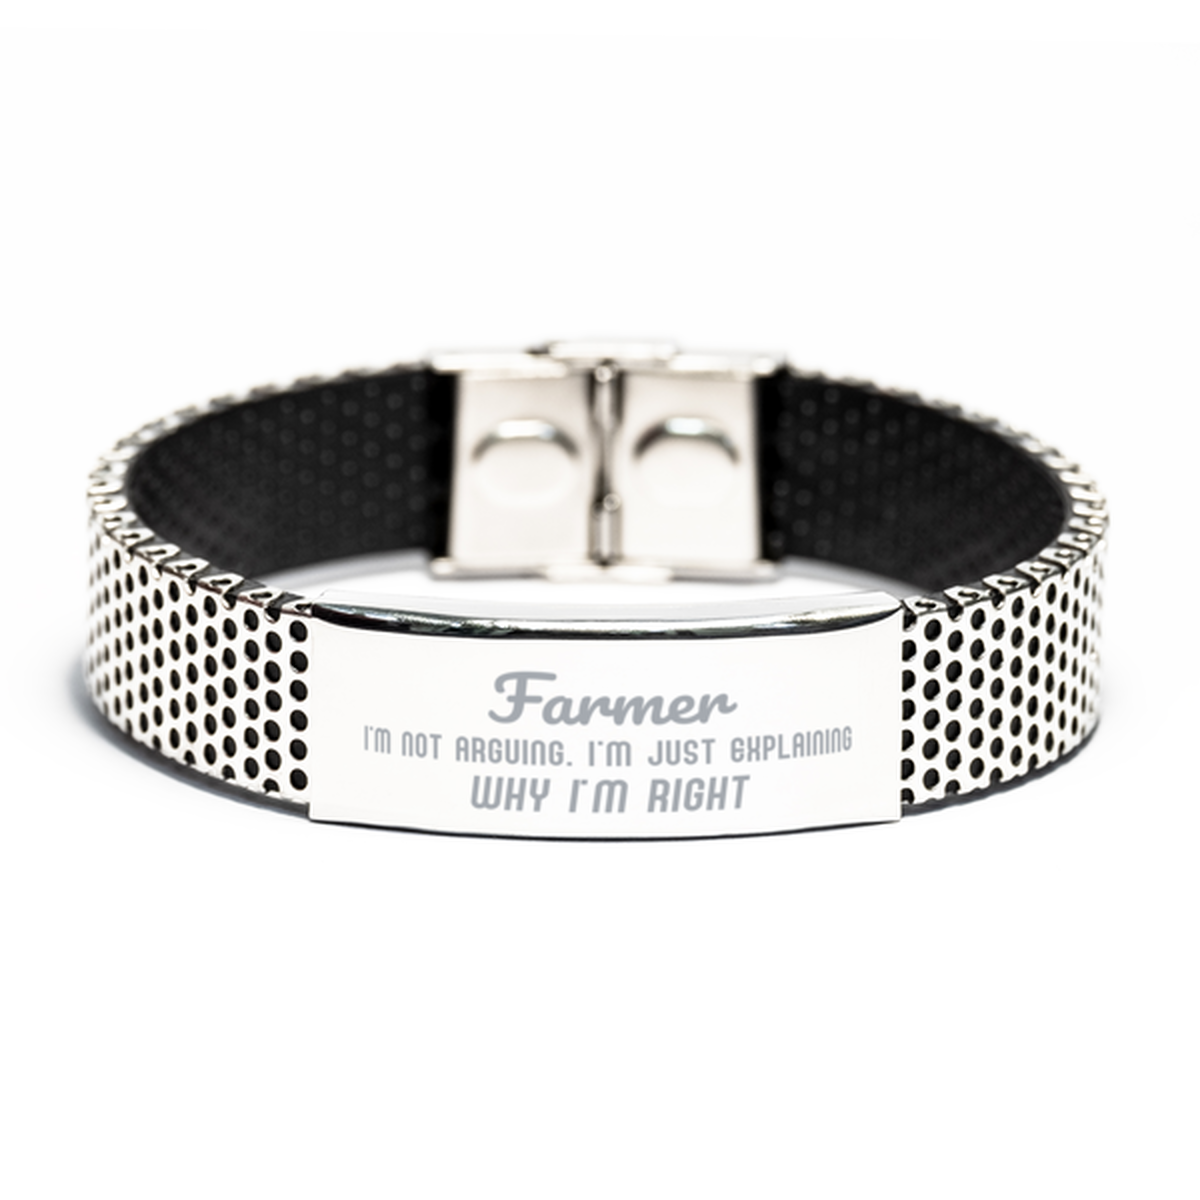 Farmer I'm not Arguing. I'm Just Explaining Why I'm RIGHT Stainless Steel Bracelet, Funny Saying Quote Farmer Gifts For Farmer Graduation Birthday Christmas Gifts for Men Women Coworker